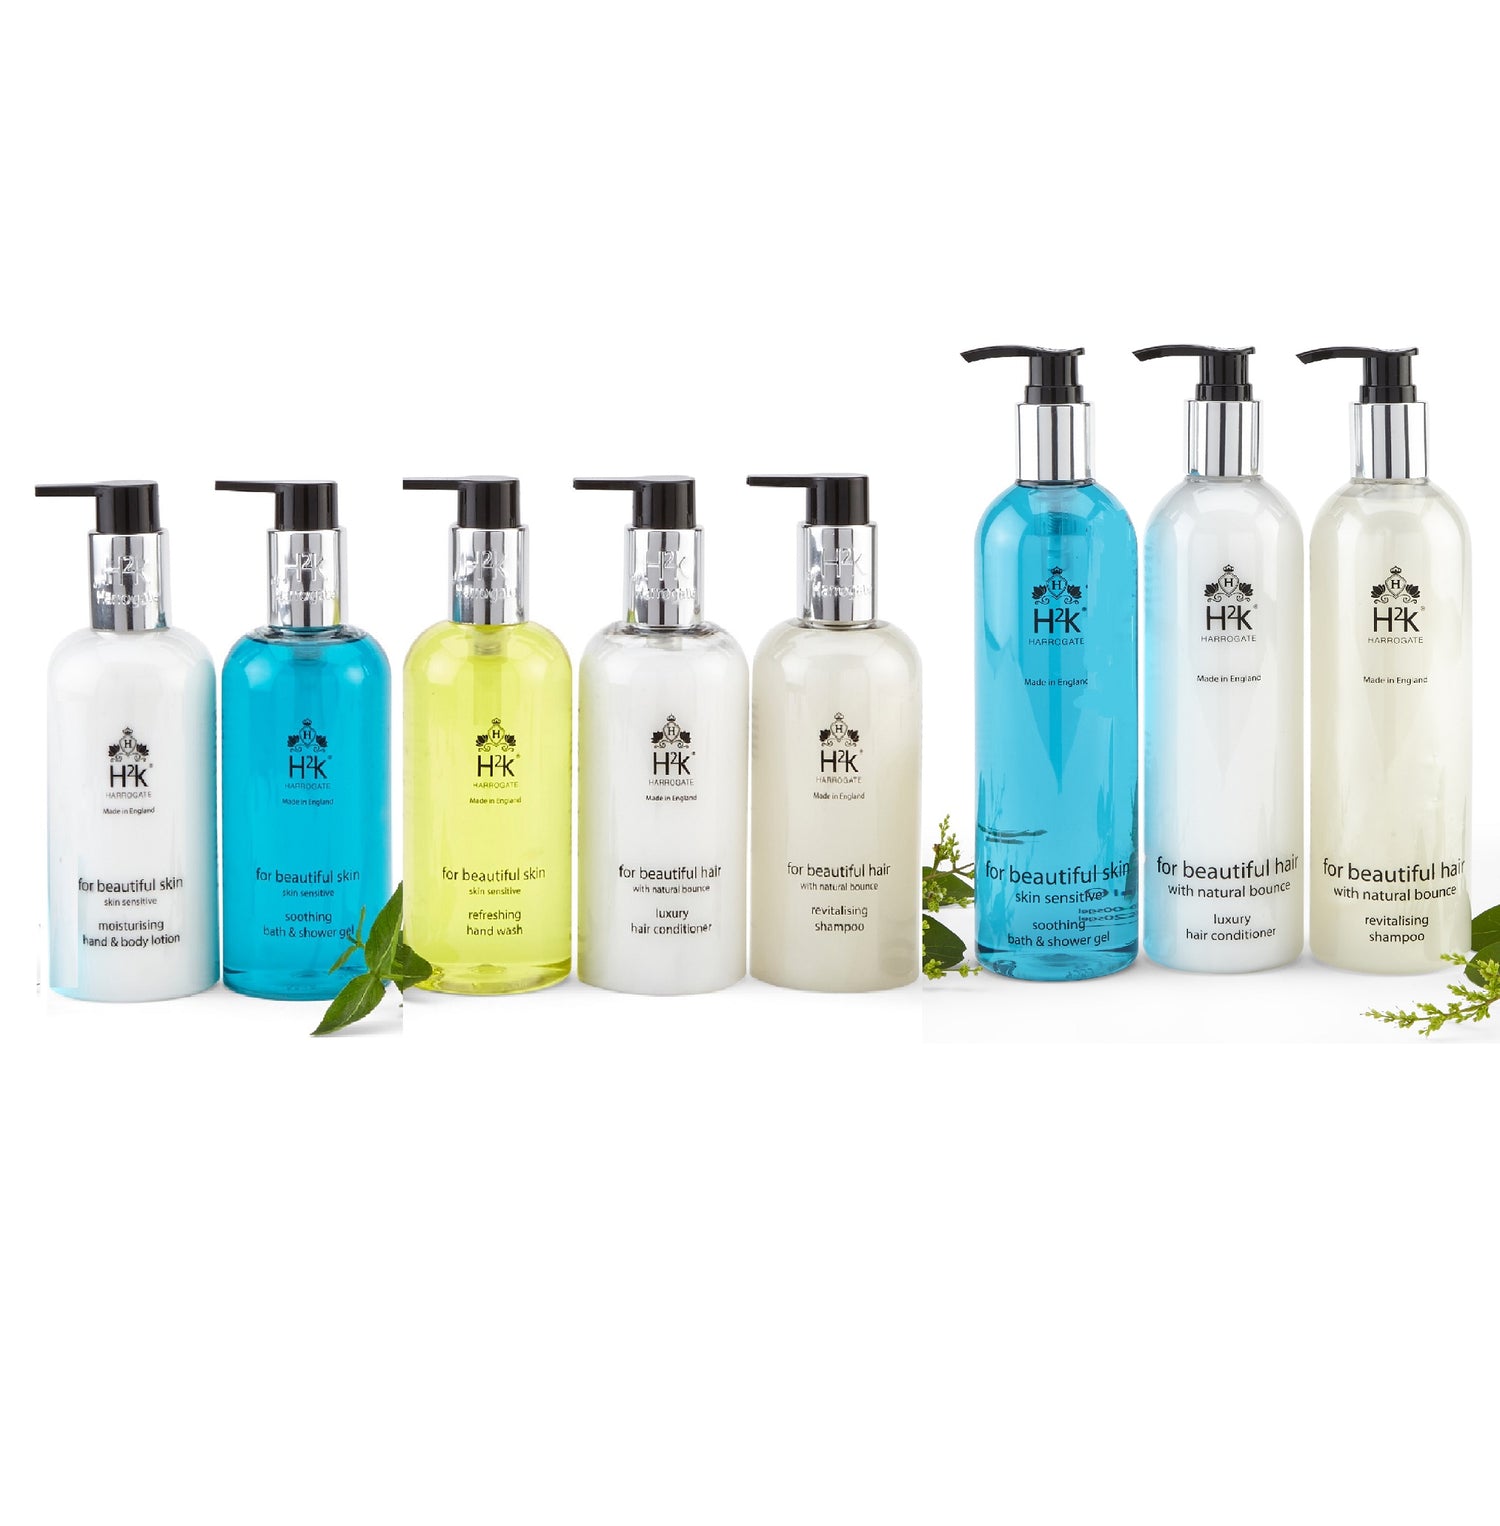 For Beautiful Skin this is a natural "sensitive skin" boosting collection